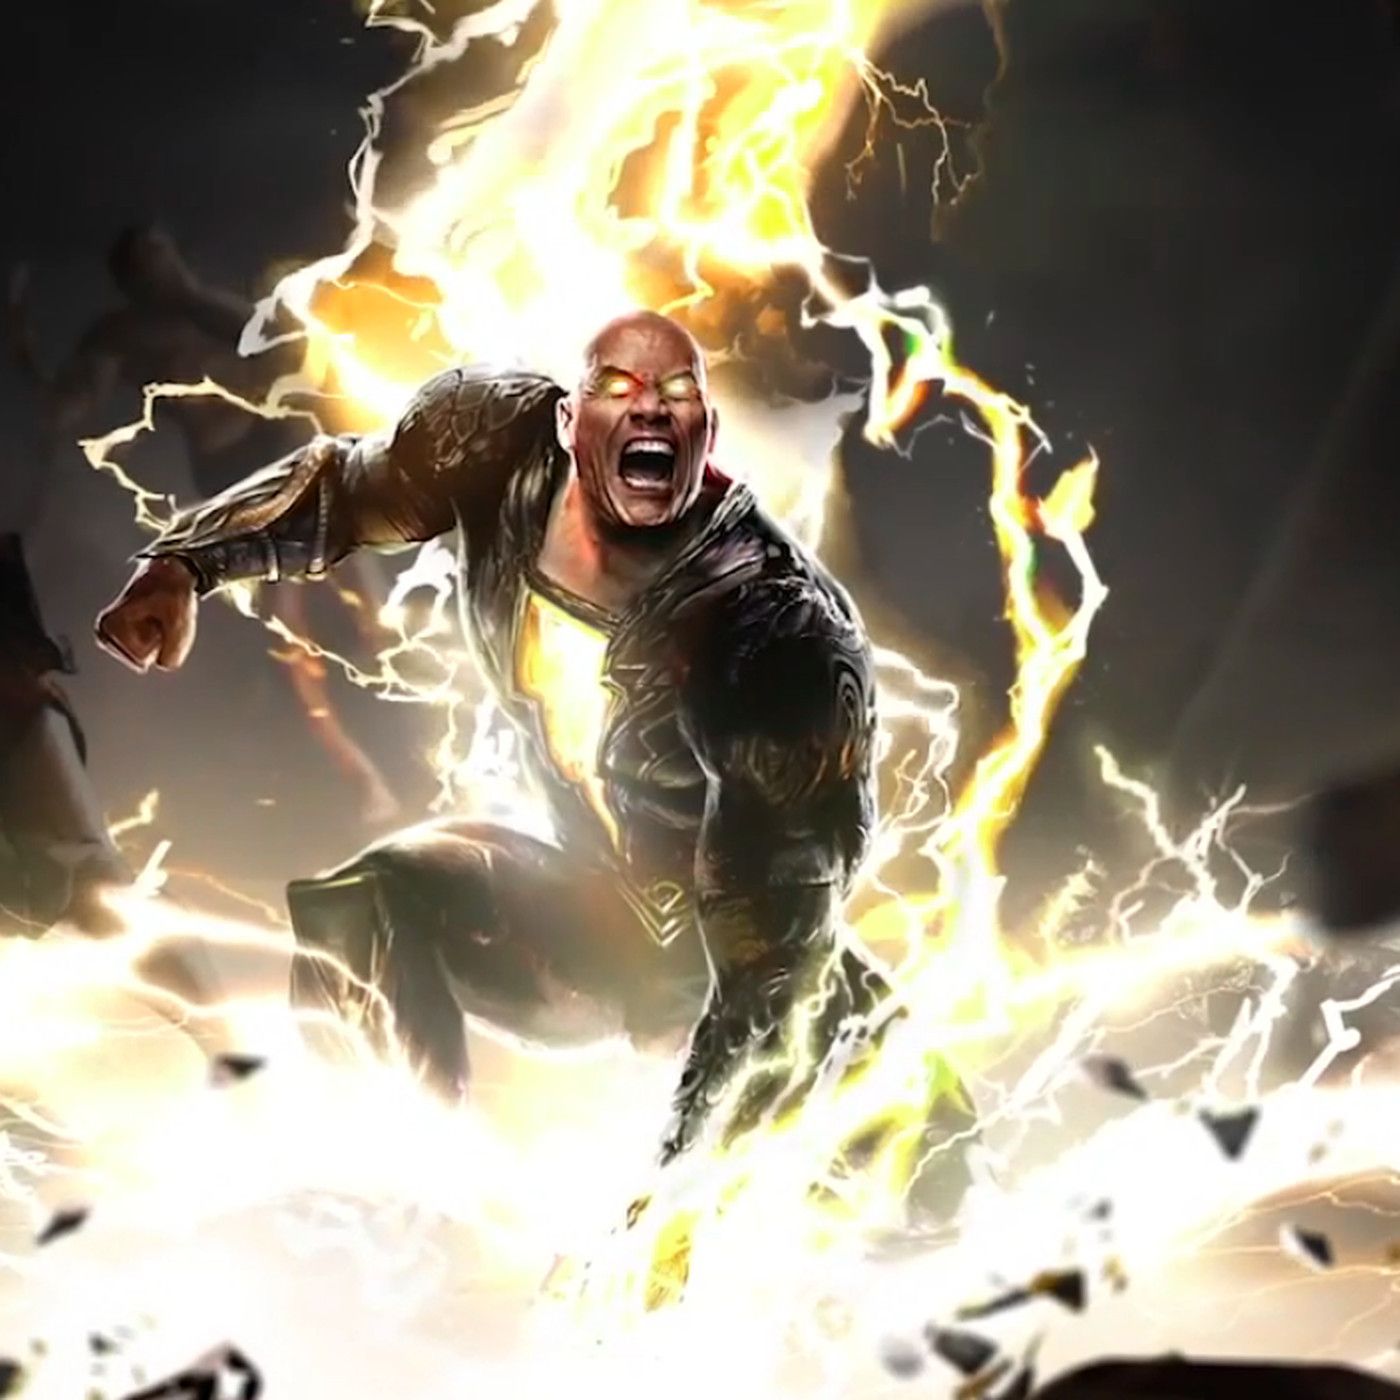 Dwayne Johnson's Black Adam won't be R rated, but will shake up DC movies